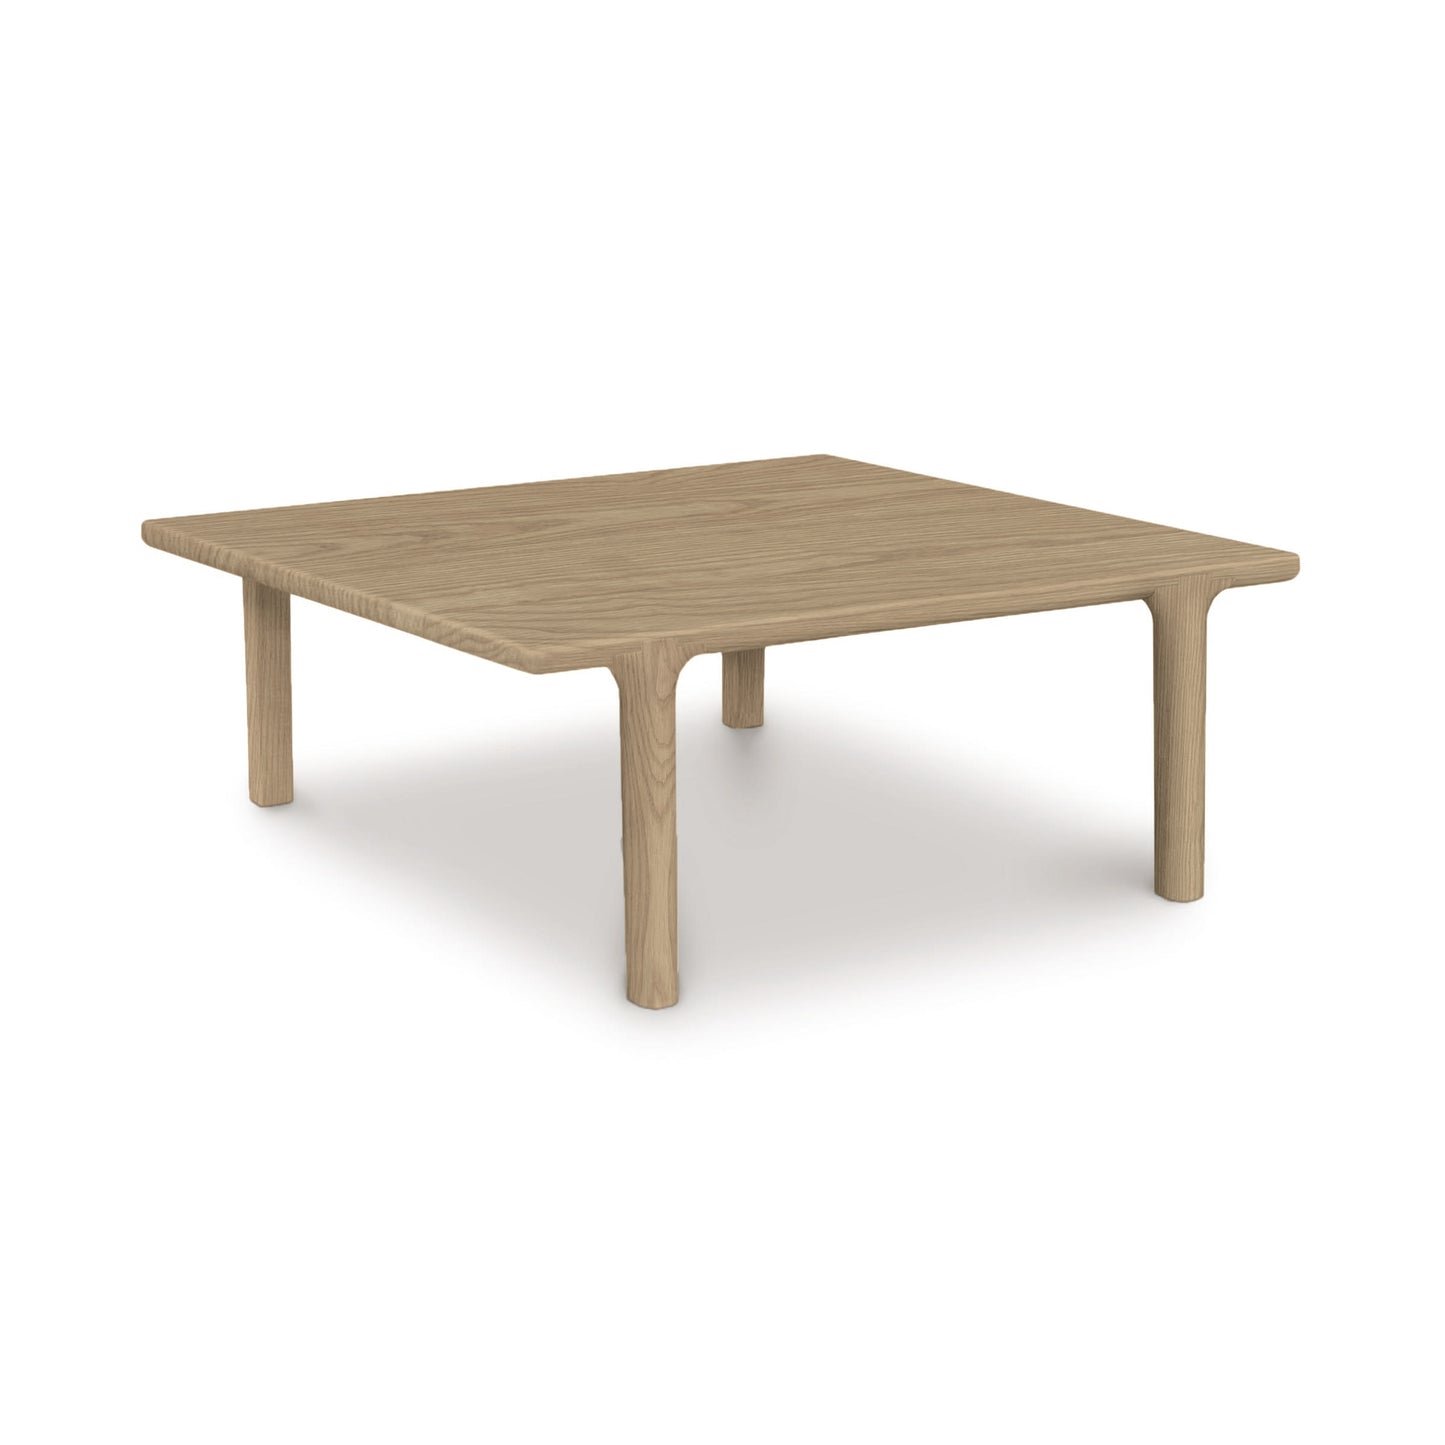 A Sierra Square Coffee Table from Copeland Furniture with legs.